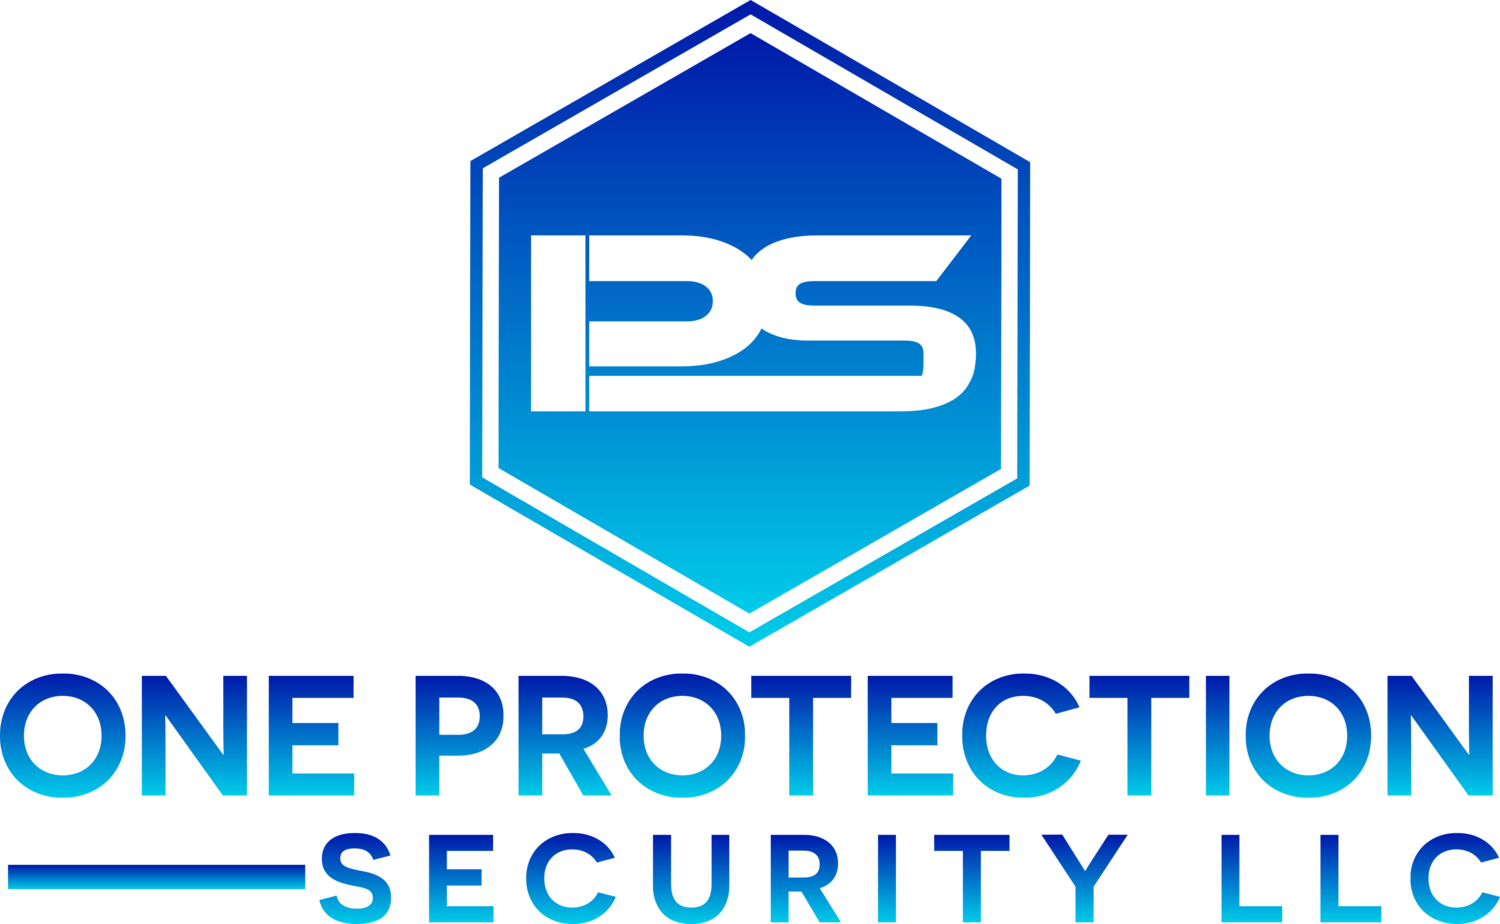 One Protection Security: Your Trusted Local Security Partner page